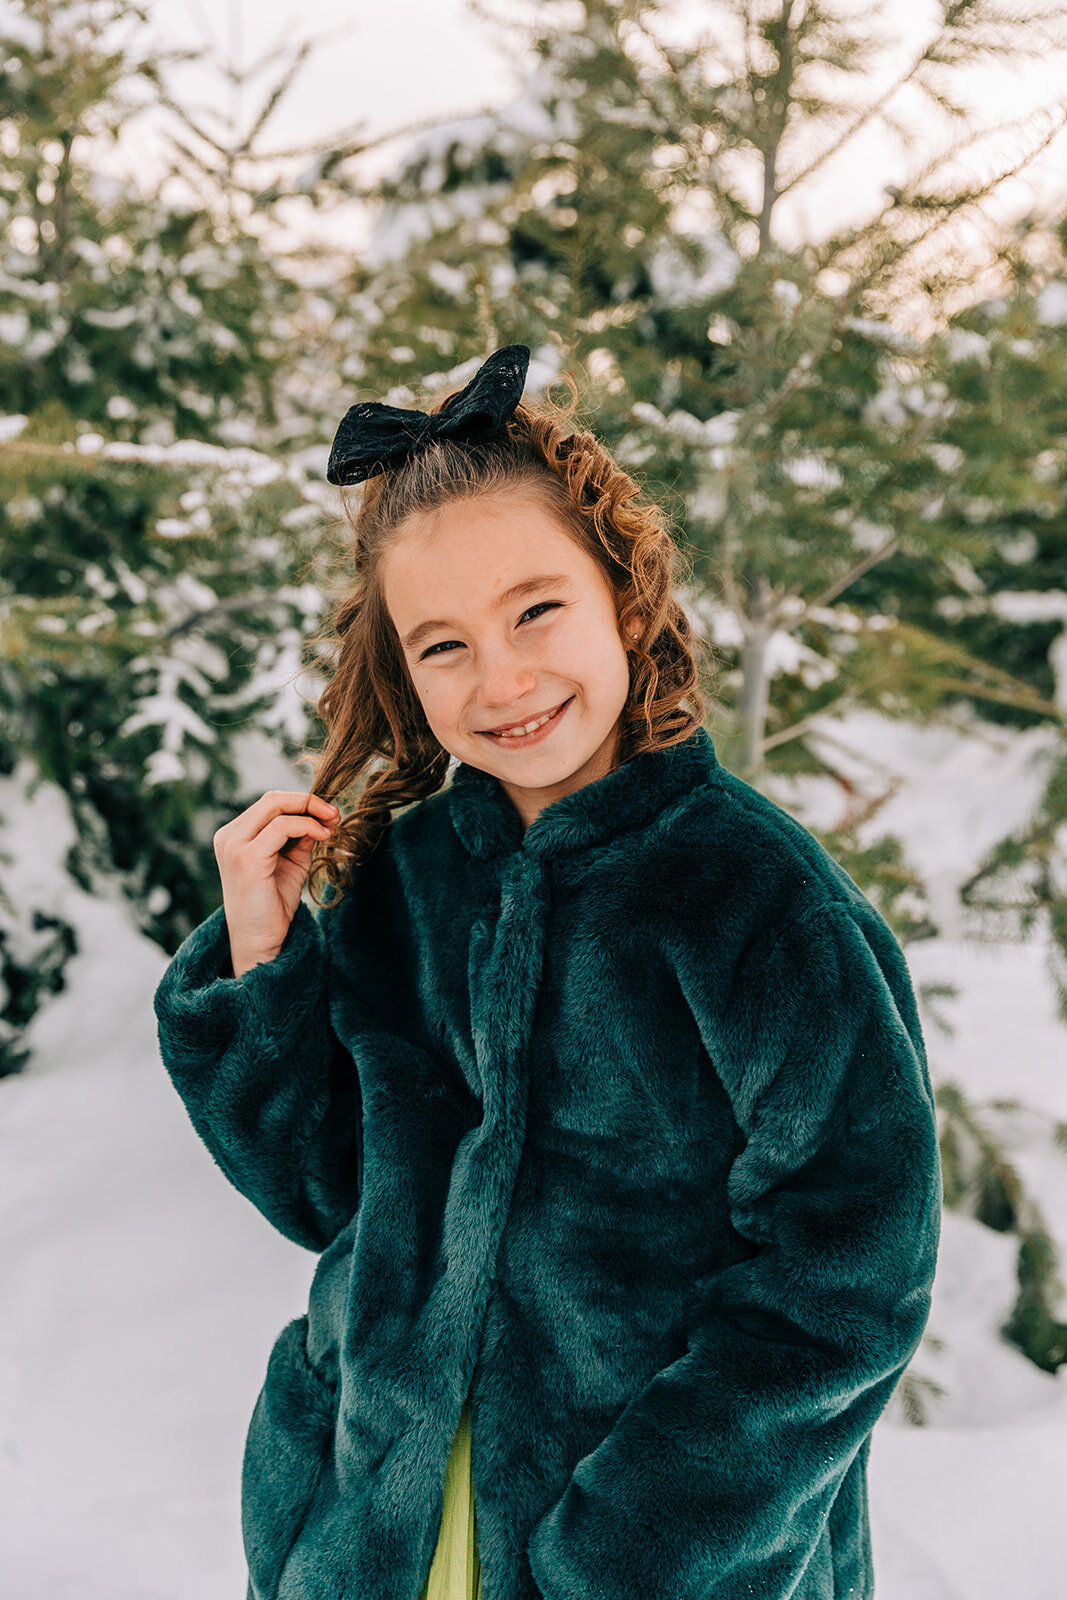  fuzzy coat green tulle dress ponytail hairstyle ideas bow winter fashion family pictures daughters family picture styling inspiration family pose ideas winter photoshoot snowy pictures adams acres tree farm family photographers in utah professional 